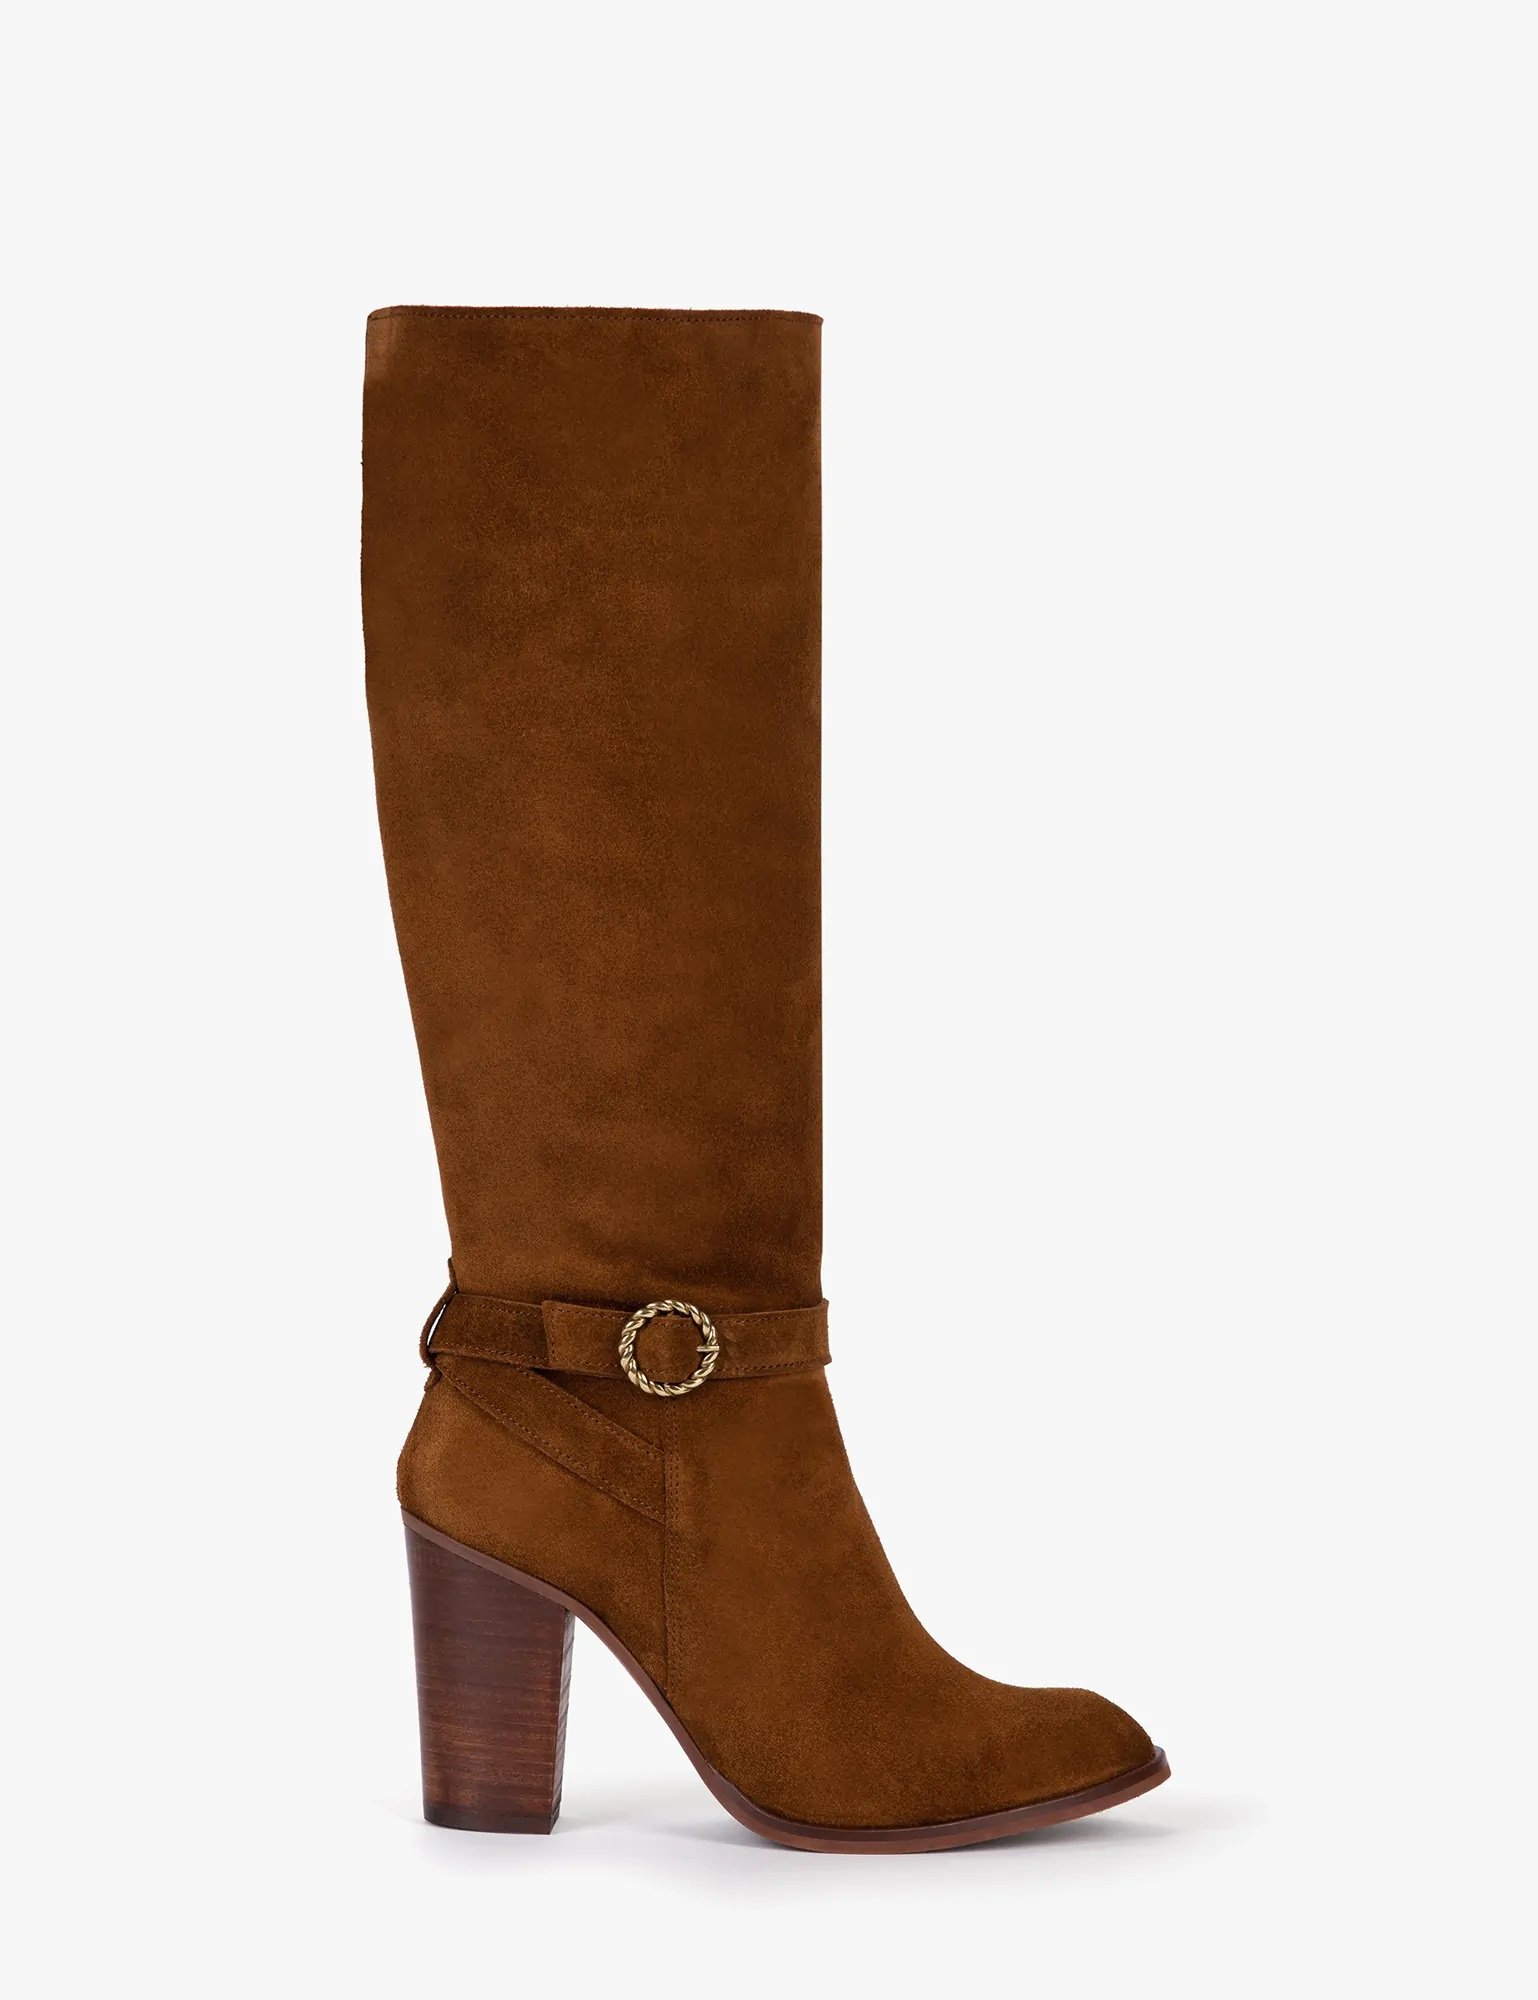 Penelope Chilvers Burford Boots in Peat Suede.jpg